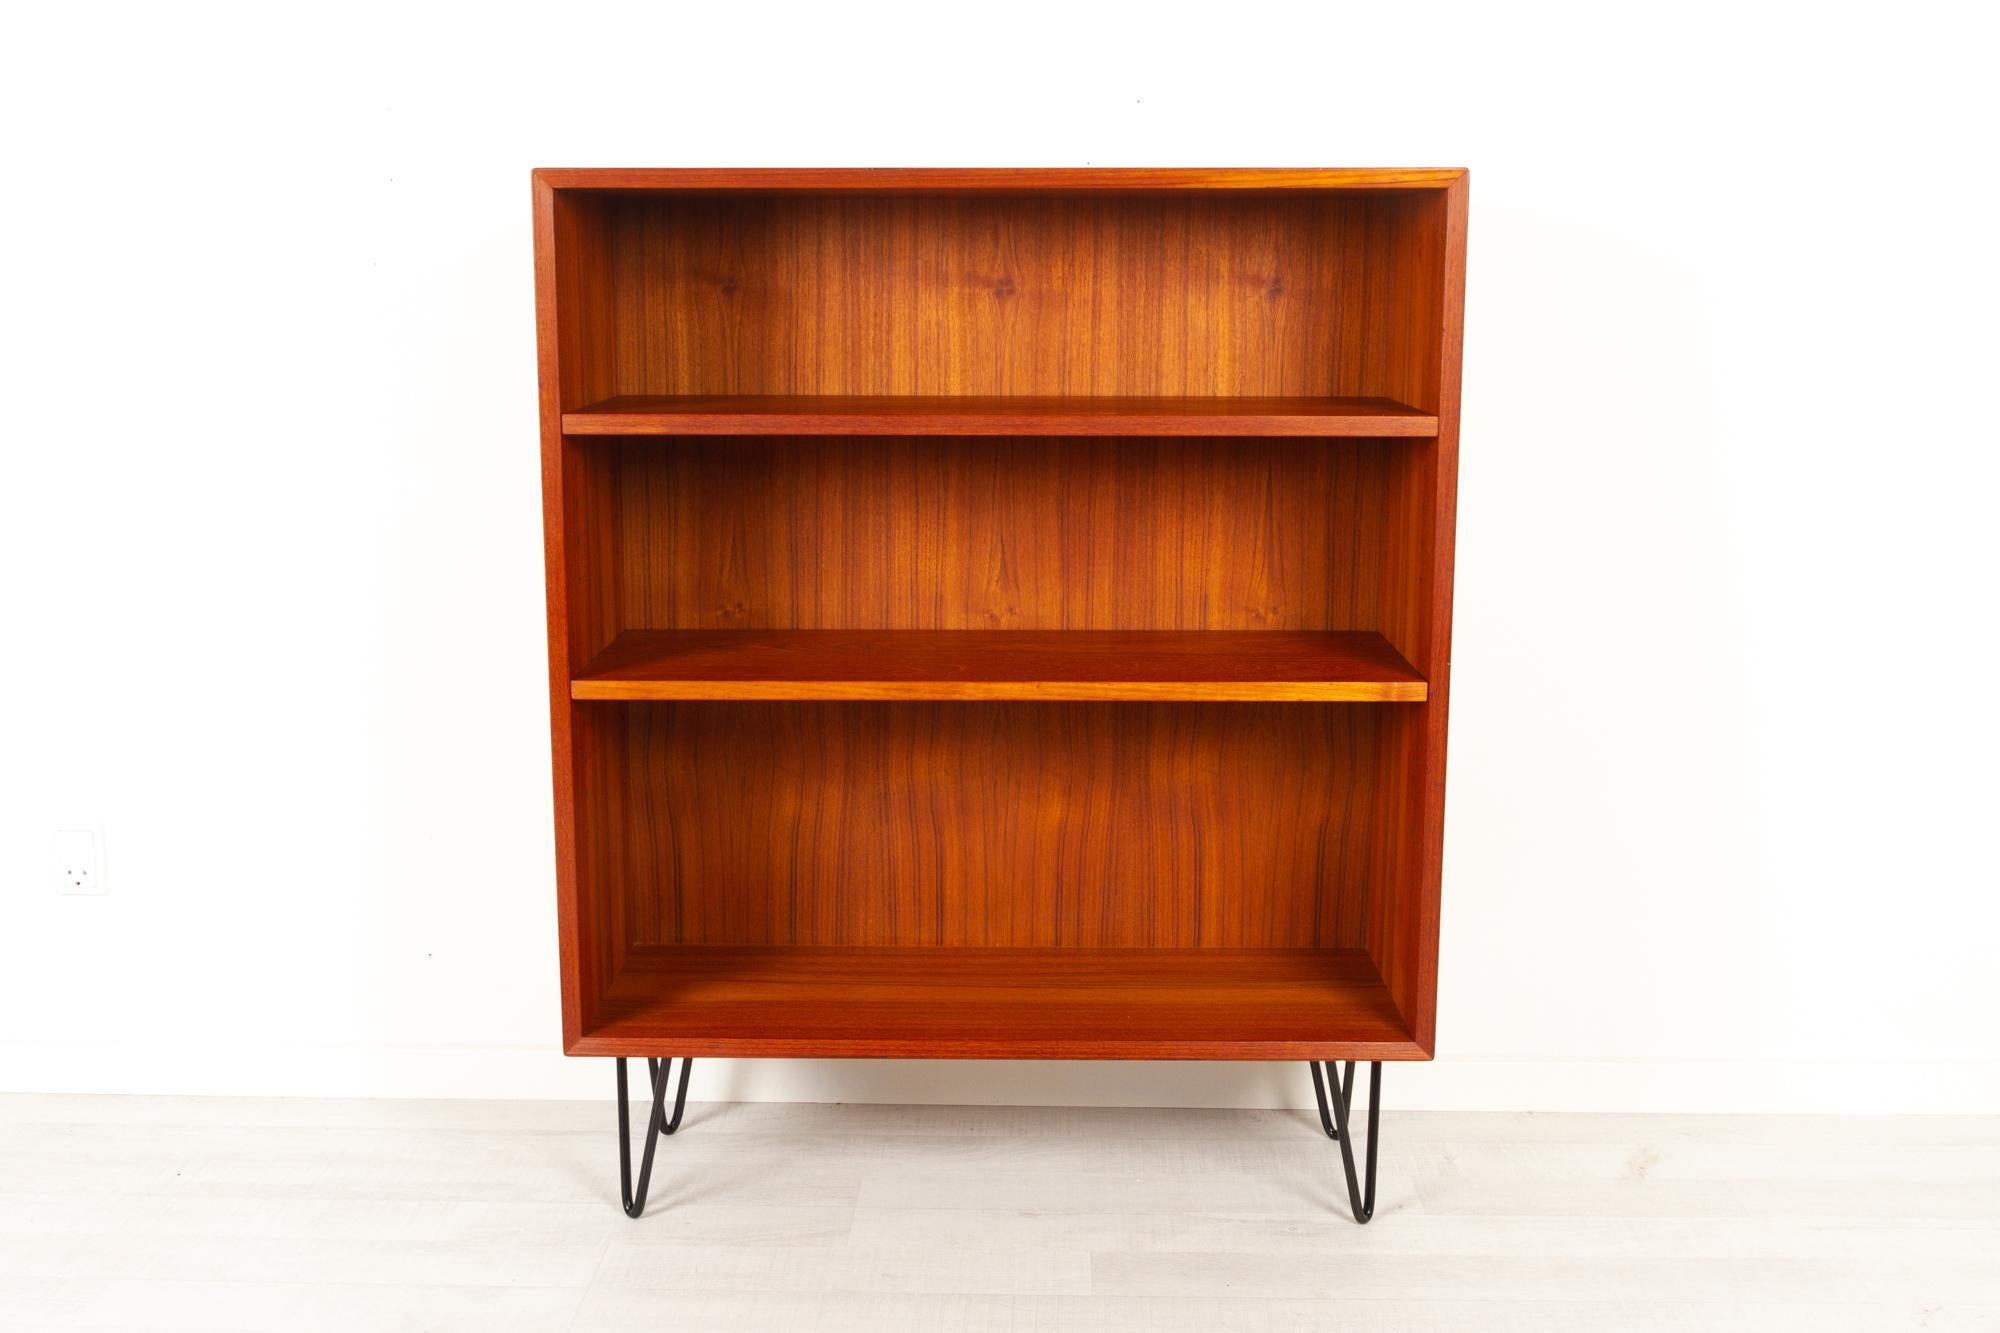 Vintage Danish teak bookcase, 1960s
Danish Mid-Century Modern bookcase on black hairpin legs. Bevelled edges on frame. Two height adjustable shelves. Light and elegant appearance.
Very good condition. Hairpin legs are a new. Cleaned and polished.